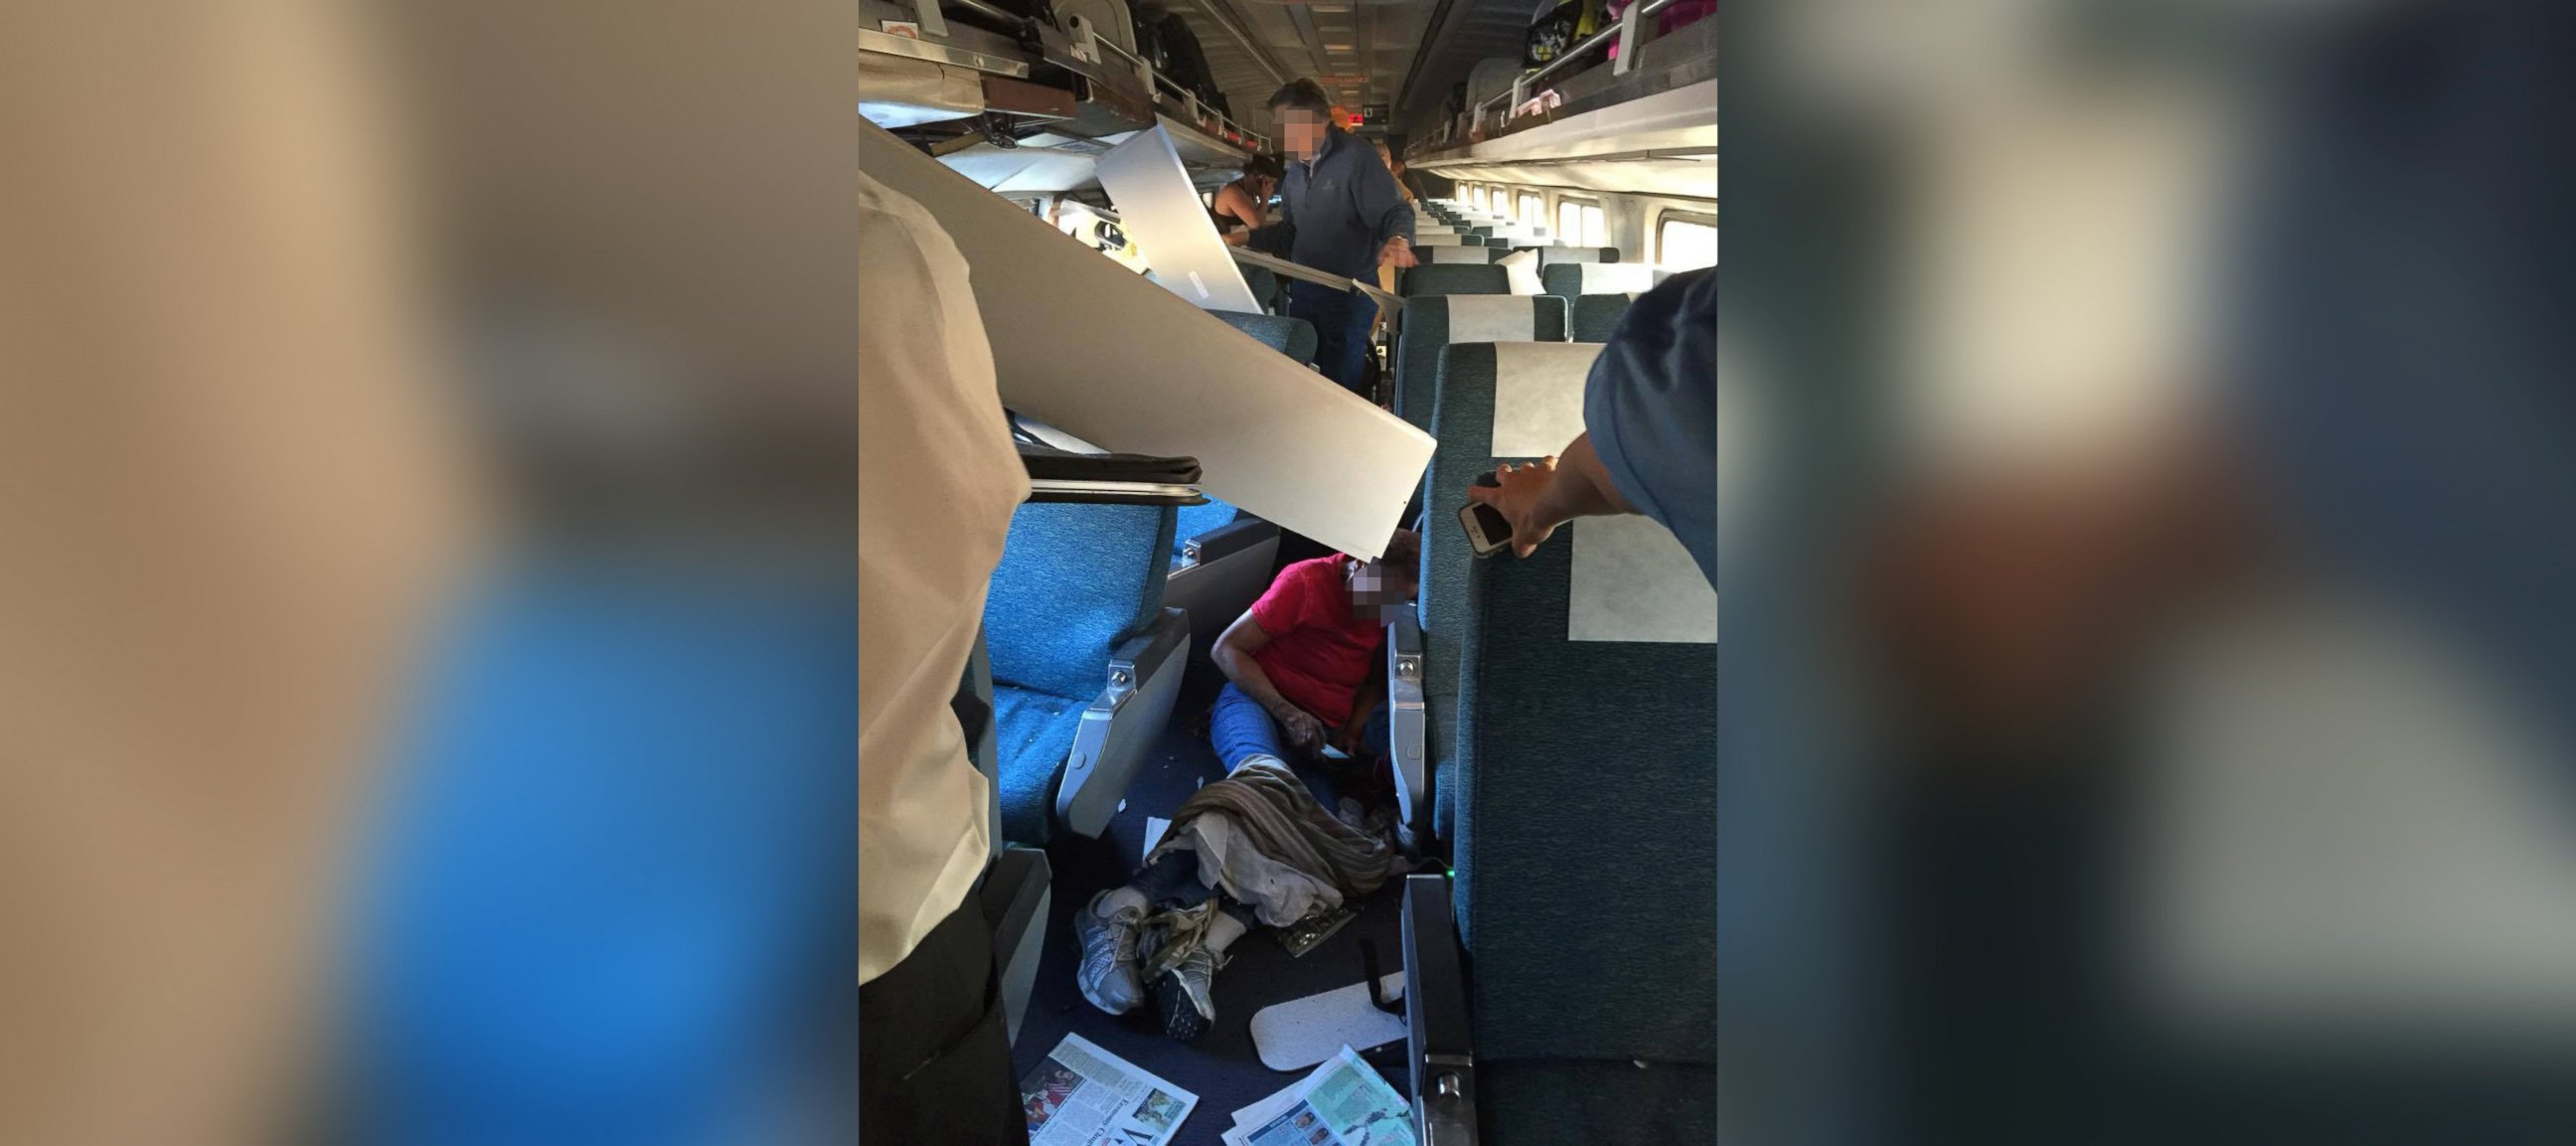 PHOTO: A photo shared by a passenger shows the situation inside the Amtrak Palmetto Train 89 after it derailed on April 3, 2016 in Chester, Pennsylvania.